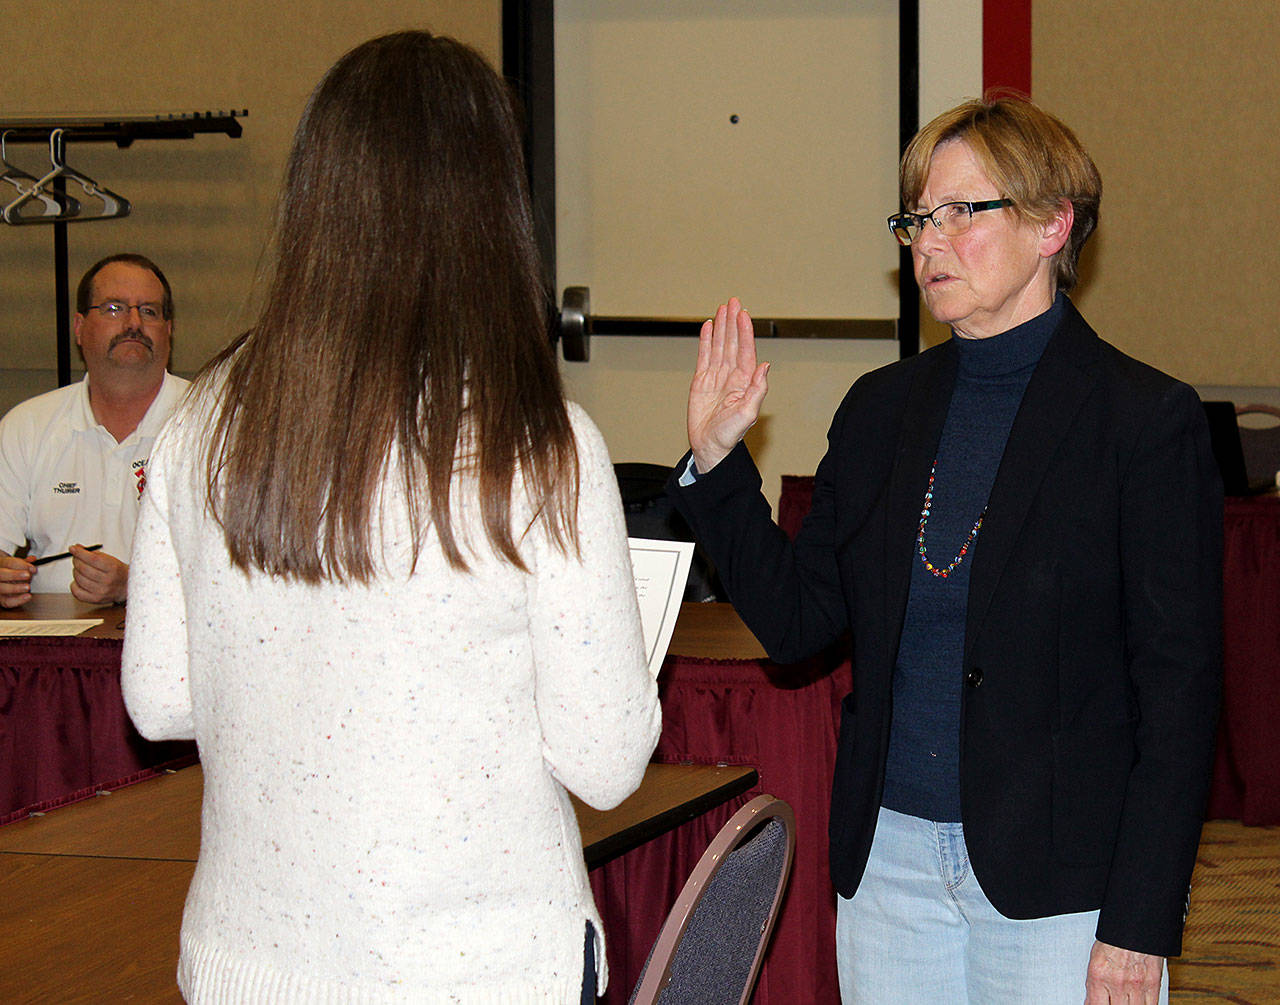 Angelo Bruscas photo: Kathryn Sprigg takes the oath of office from Angela Folkers after being selected from among seven applicants for the open Ocean Shores City Council Position 2 on Monday.                                Angelo Bruscas photo: Kathryn Sprigg takes the oath of office from Angela Folkers after being selected from among seven applicants for the open Ocean Shores City Council Position 2 on Monday.